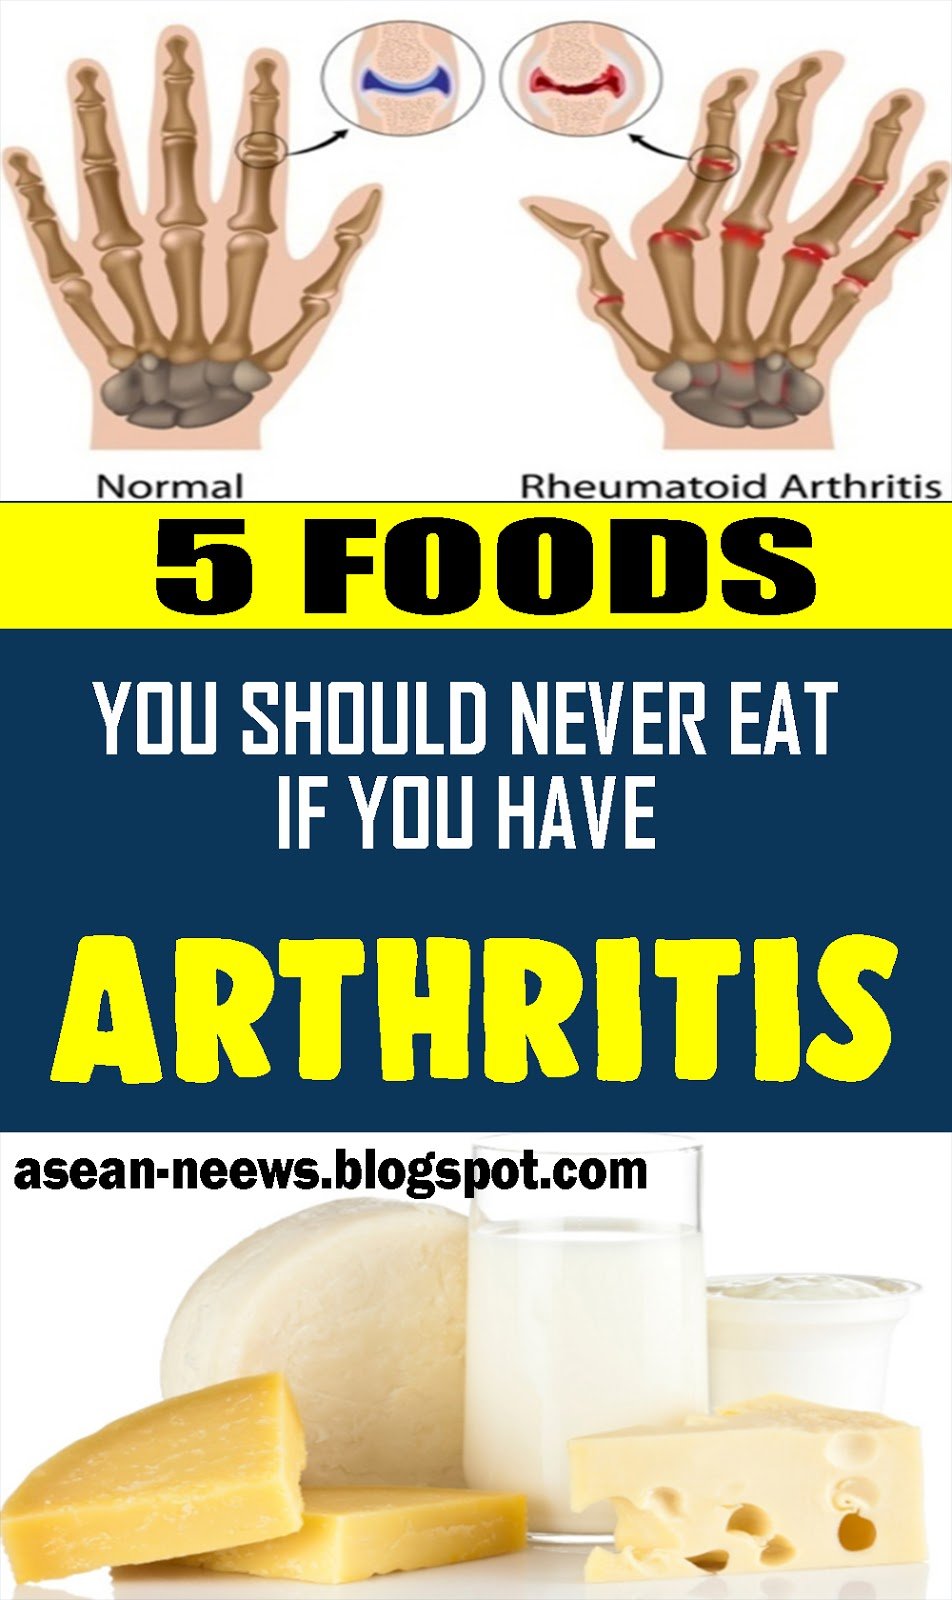 5 Foods You Should Never Eat If You Have Arthritis